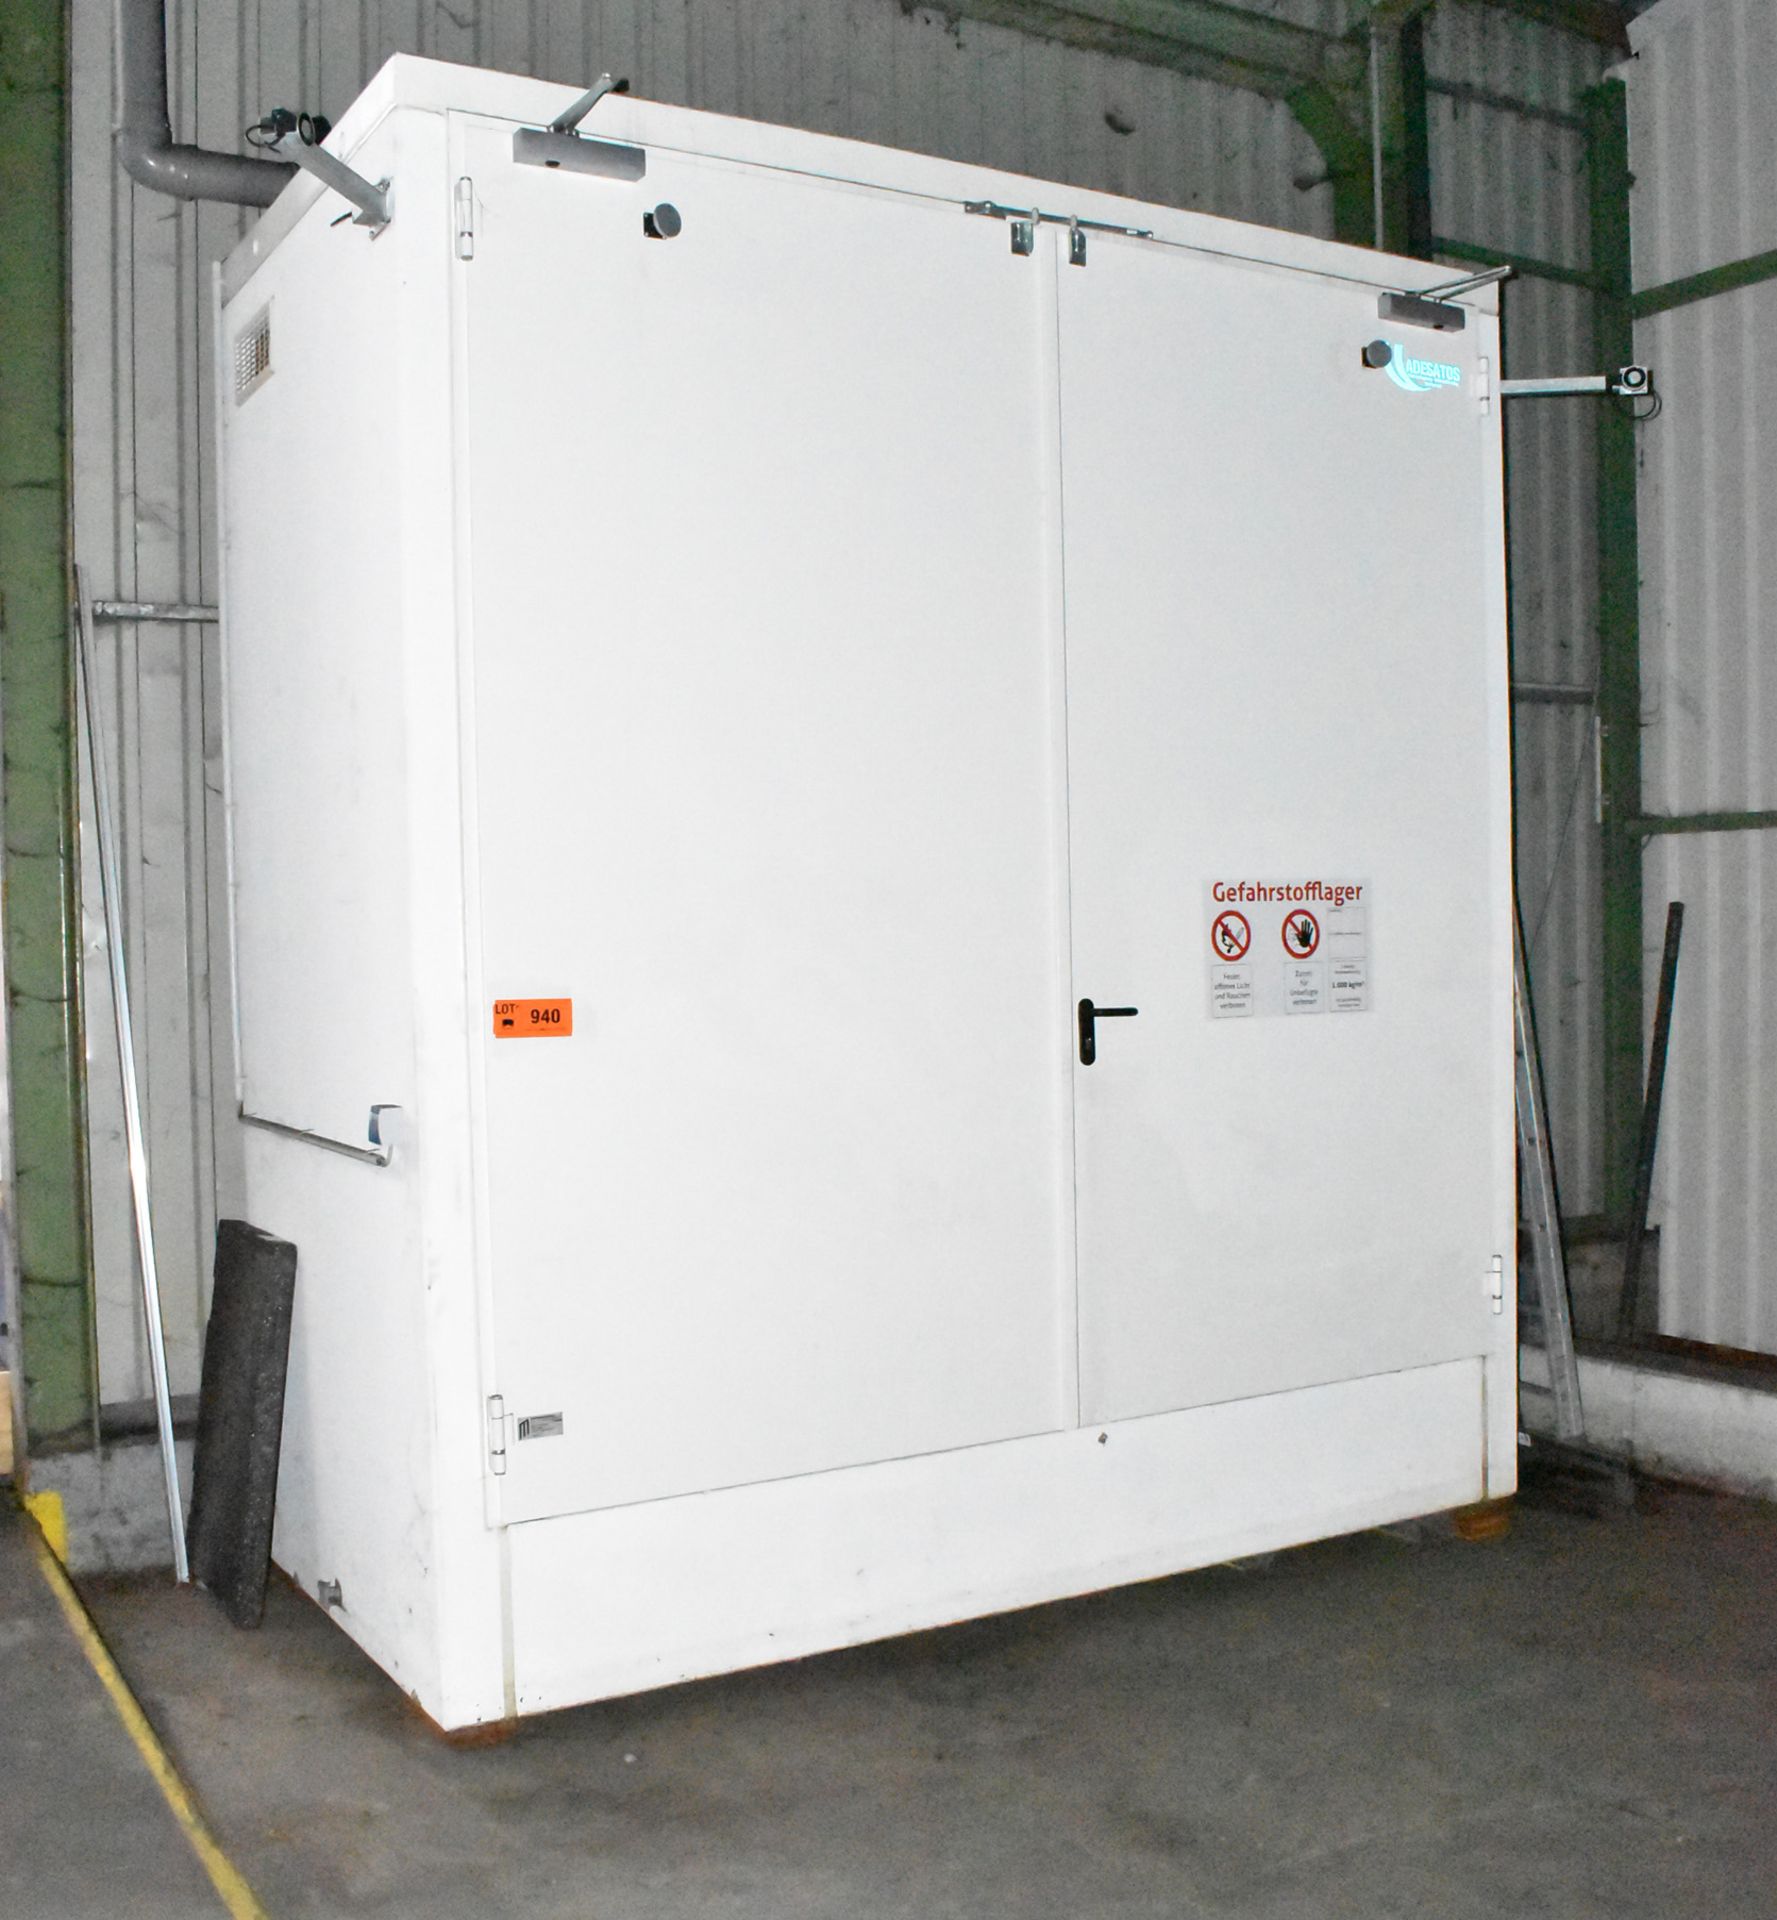 GEFAHRSTOFFLAGER 2 DOOR CHEMICAL STORAGE CABINET (HOF) [Removal Fee = € 220 + applicable VAT -